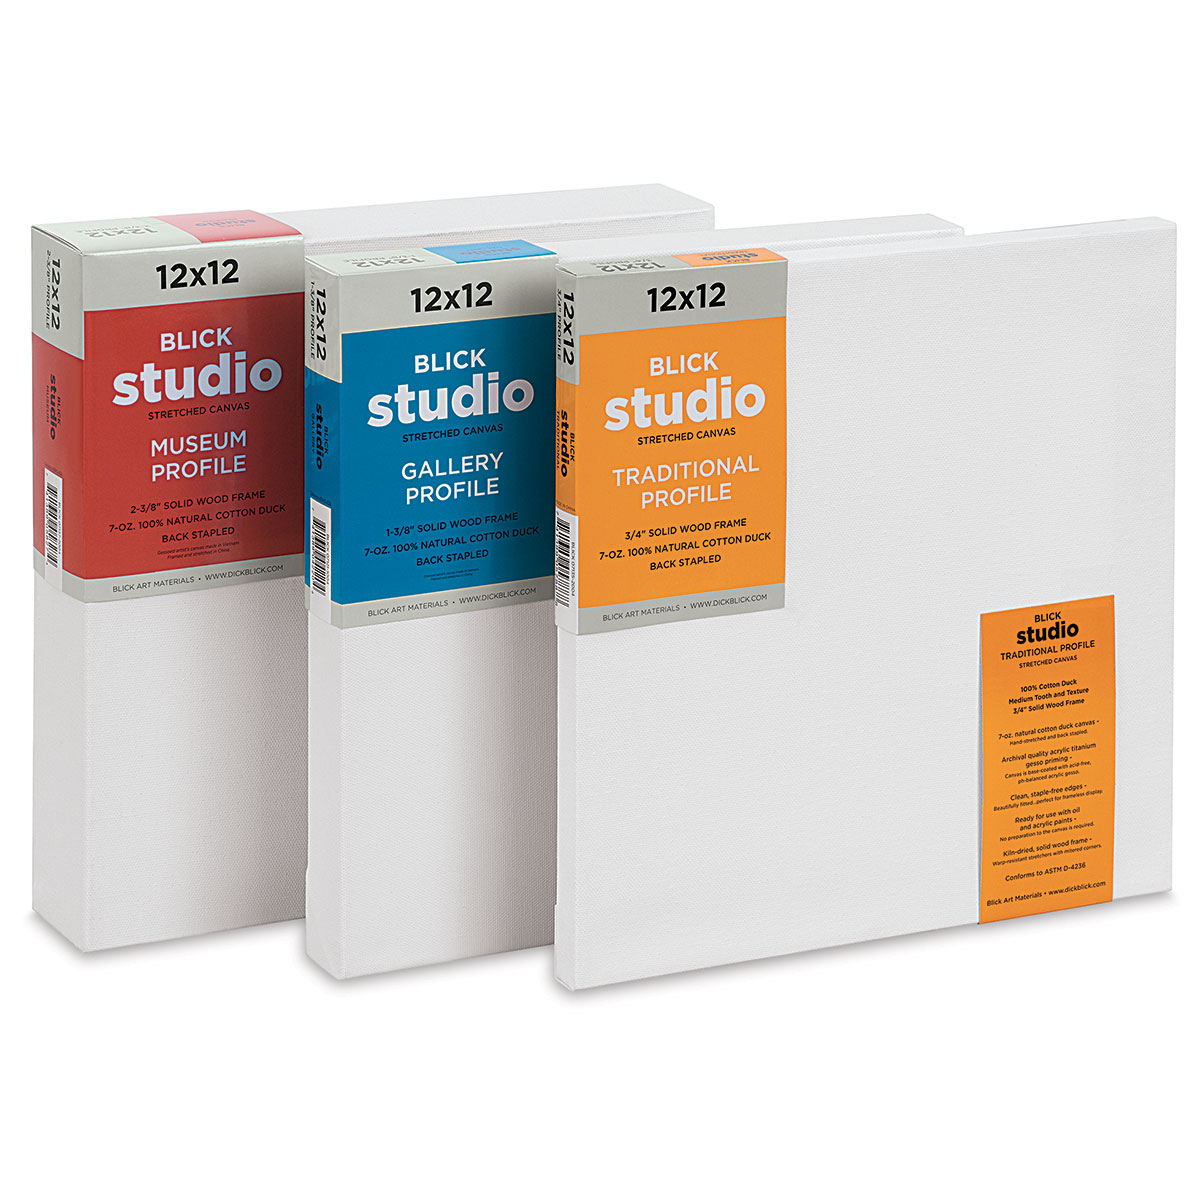 Creative Mark Cotton Canvas Panels 12 Pack - 4x6 - Professional Quality Fine Weave Acrylic Primed Artist Canvas Panels for Painting, Acrylics